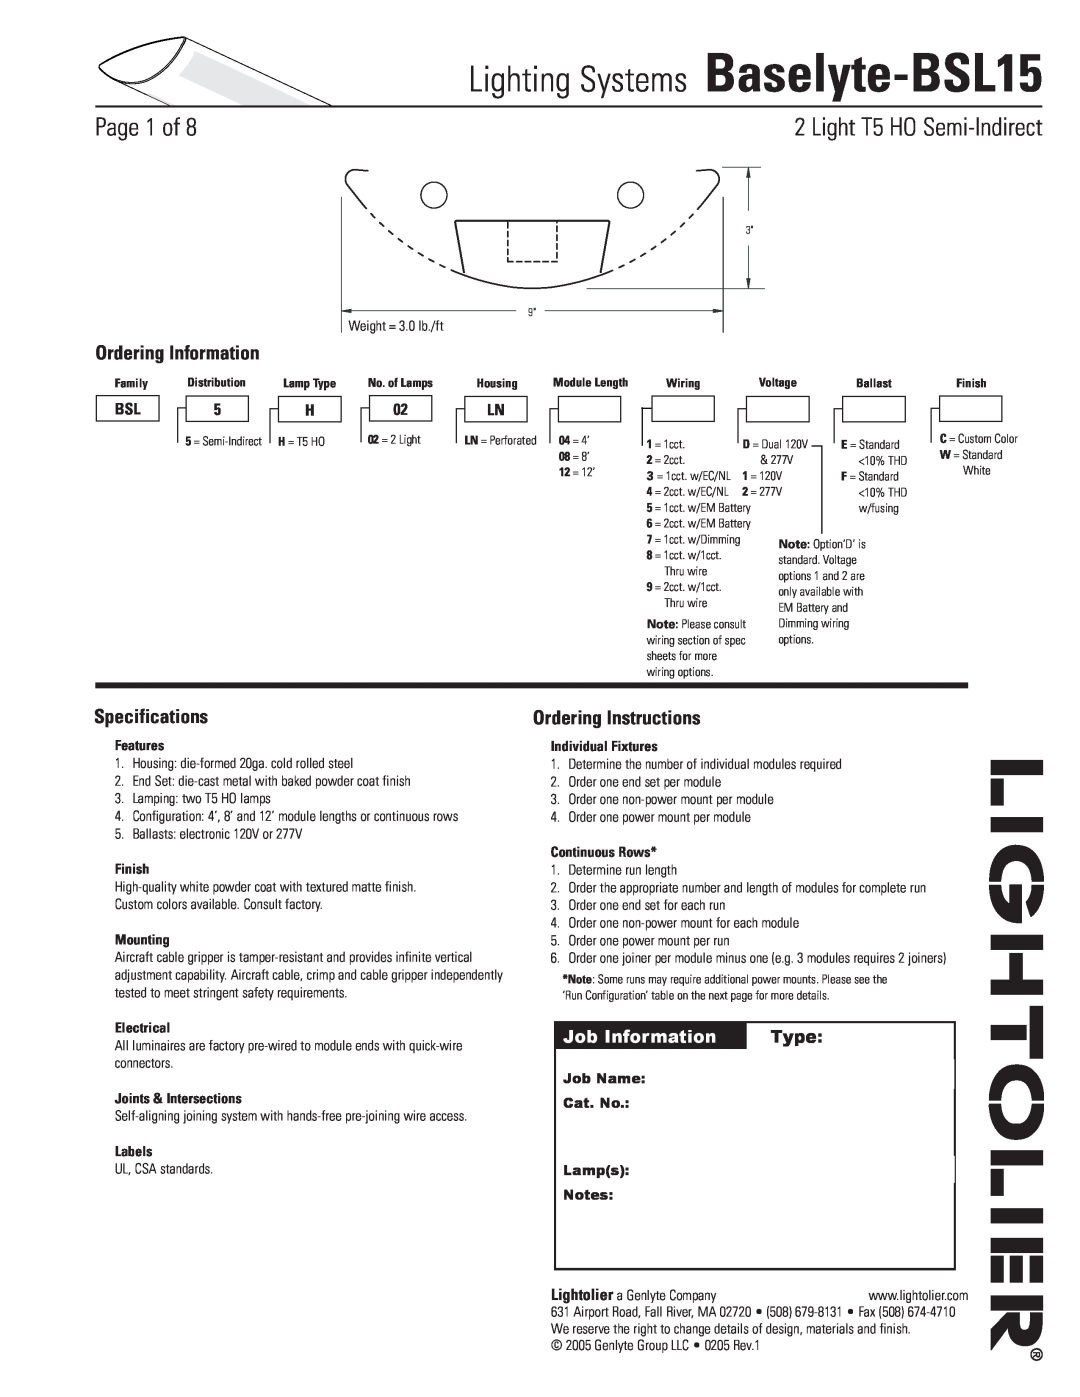 Lightolier specifications Lighting Systems Baselyte-BSL15, Page  of, Light T5 HO Semi-Indirect, Ordering Information 